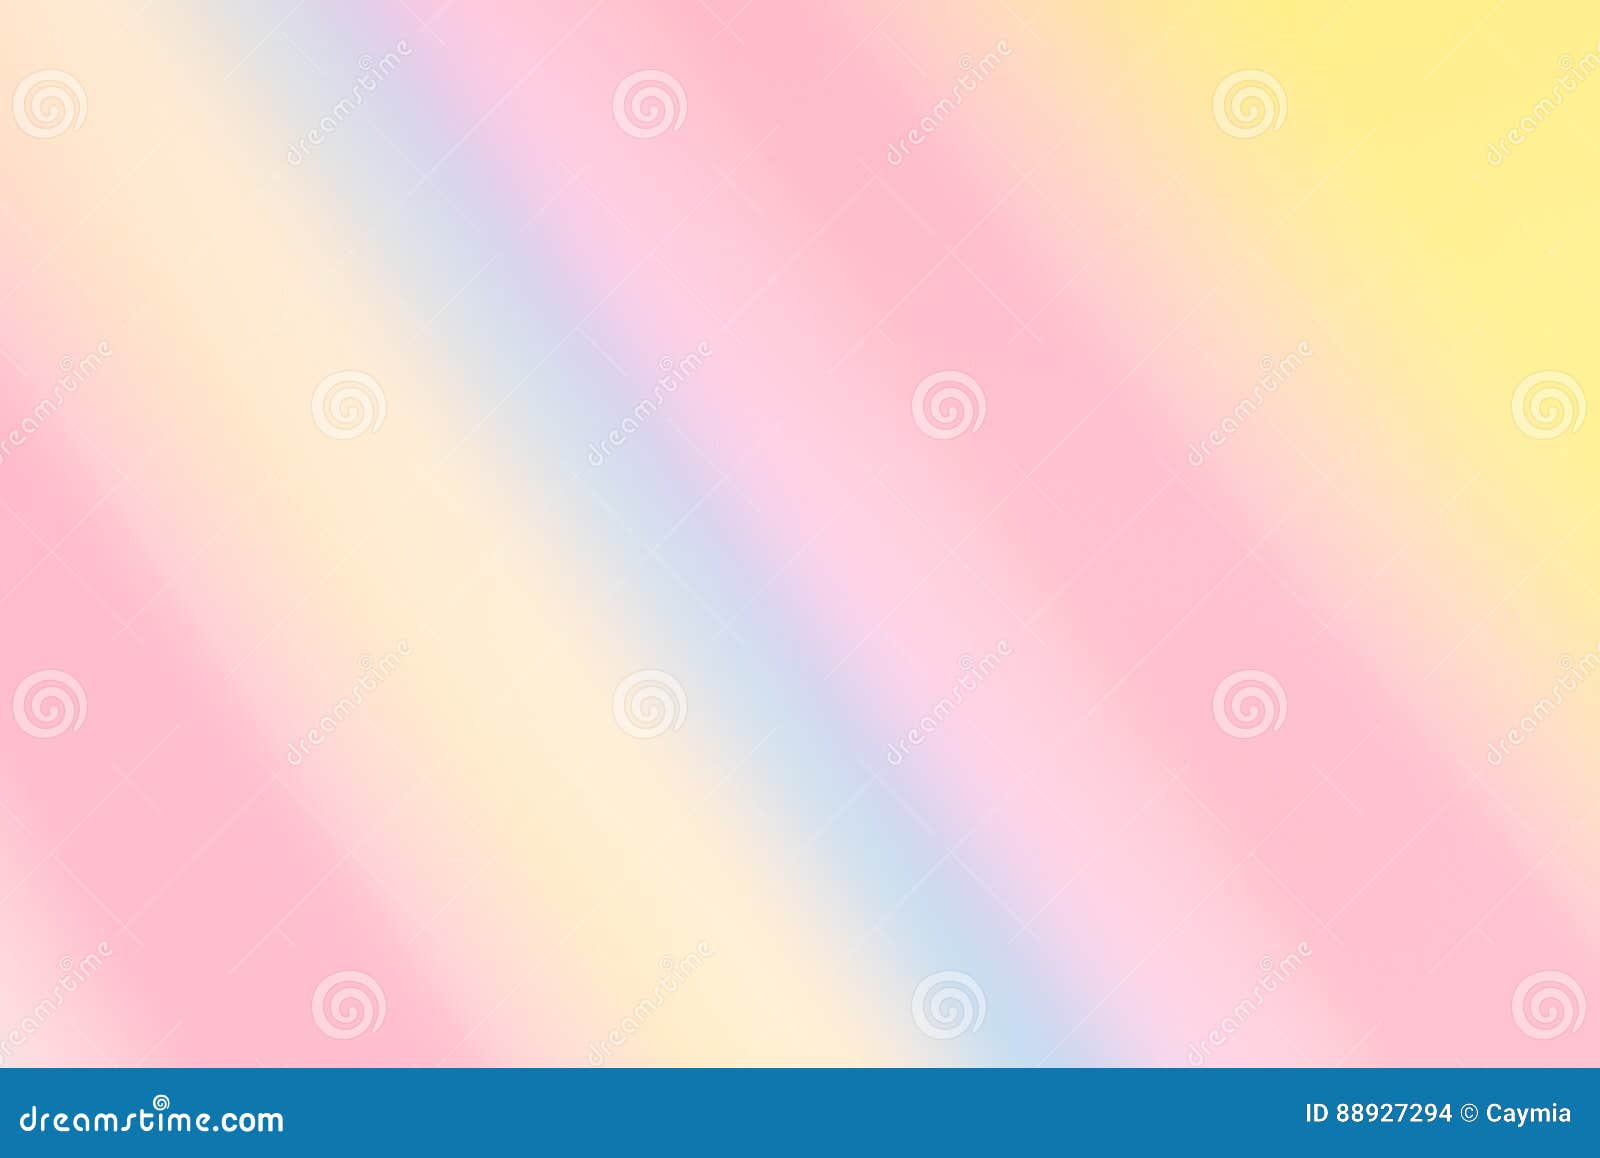 softly blurred diagonal candy stripes background. spring, summer